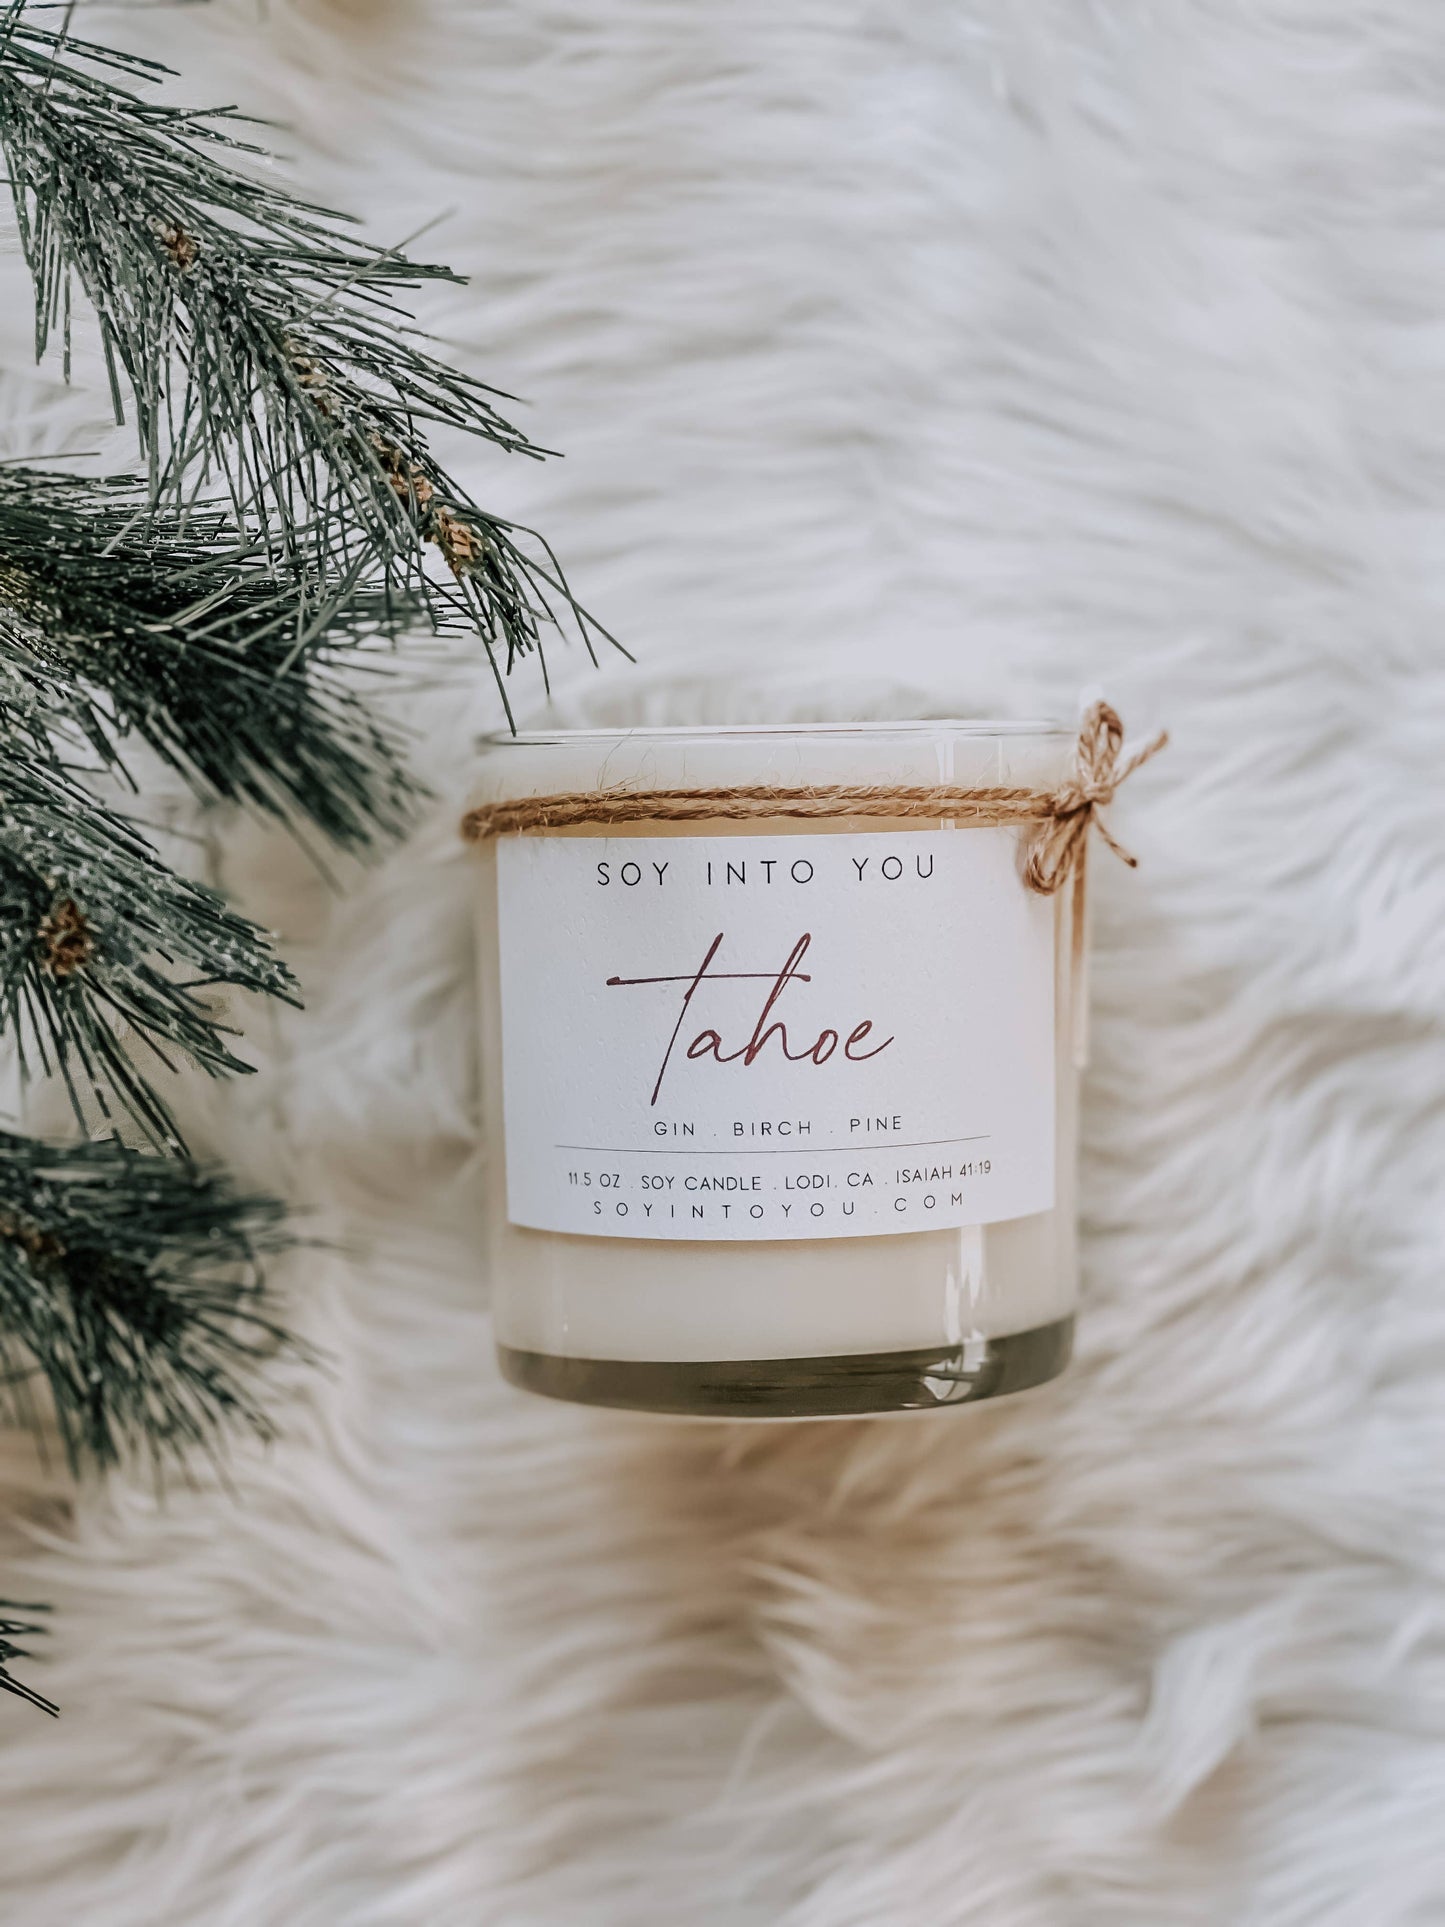 Soy Into You - Tahoe: Wood Wick